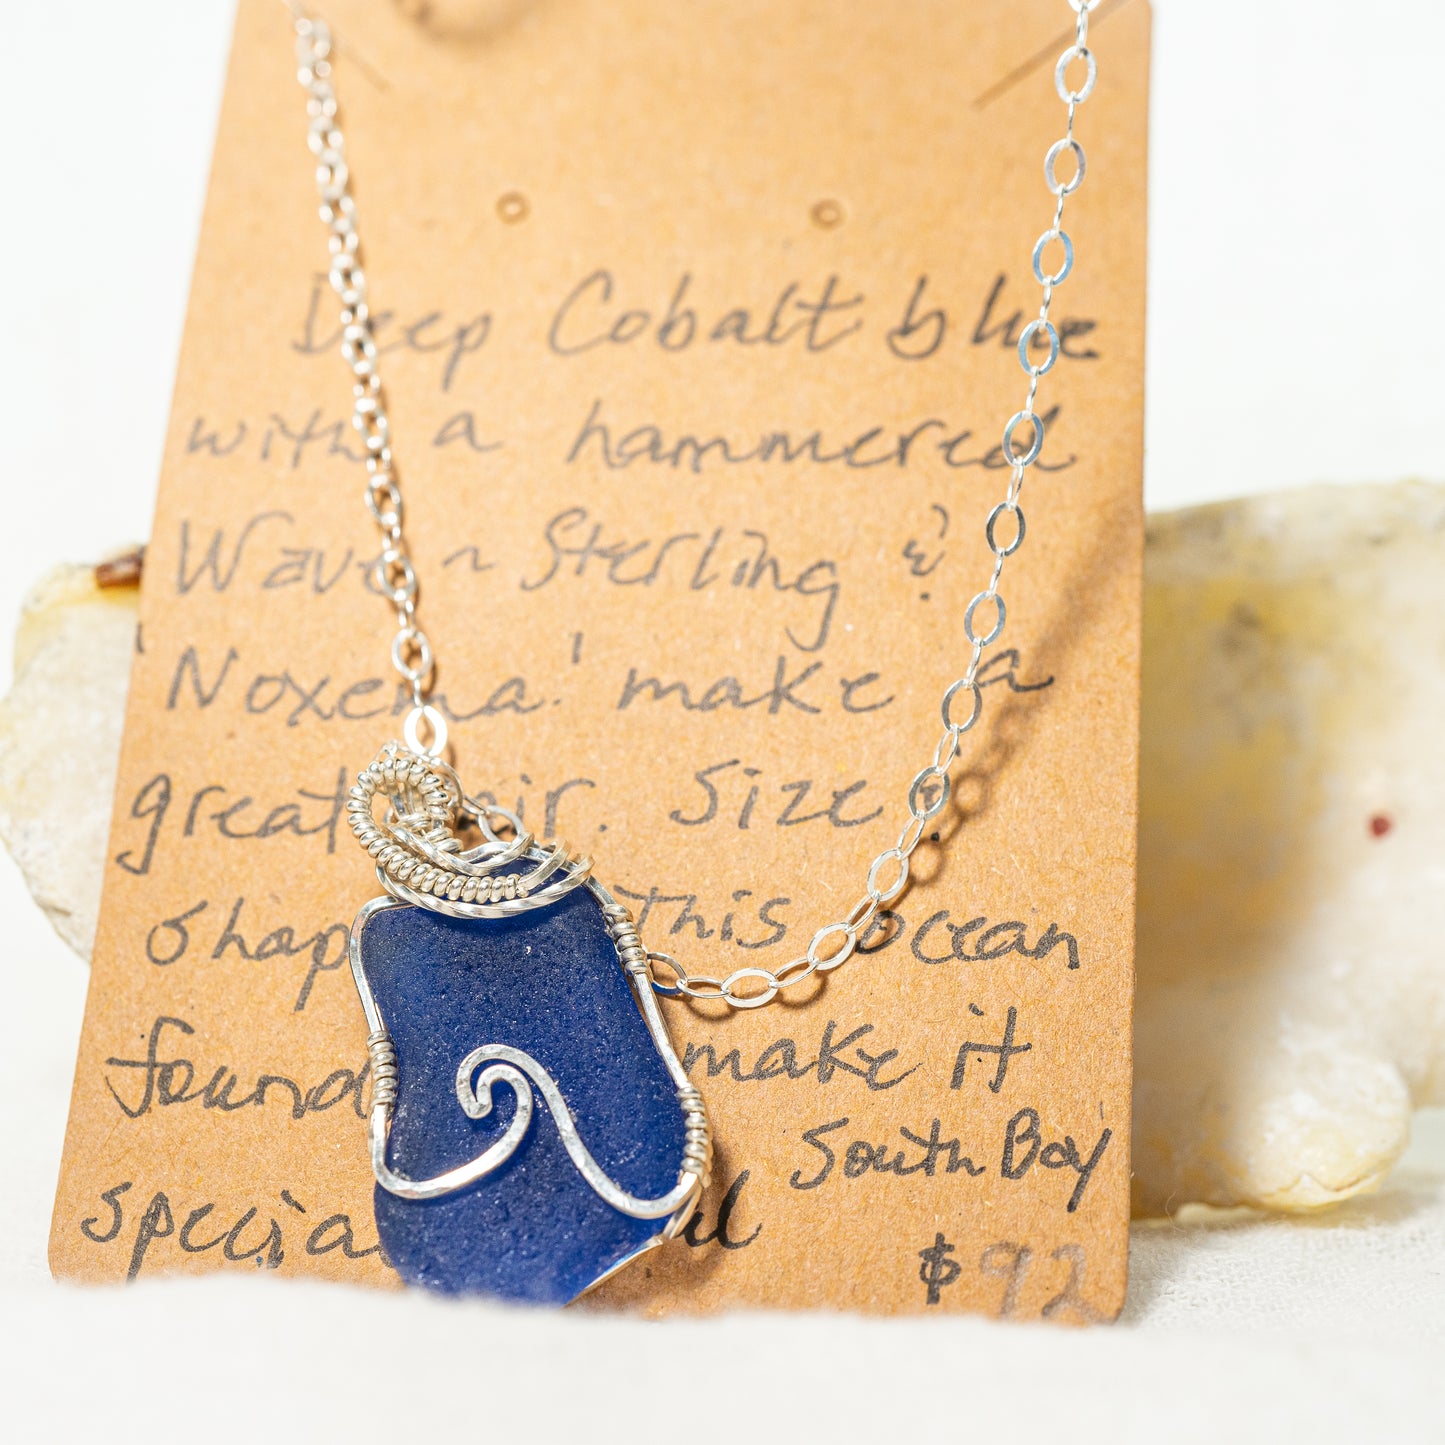 Deep Cobalt Blue with Classic Hammered Wave